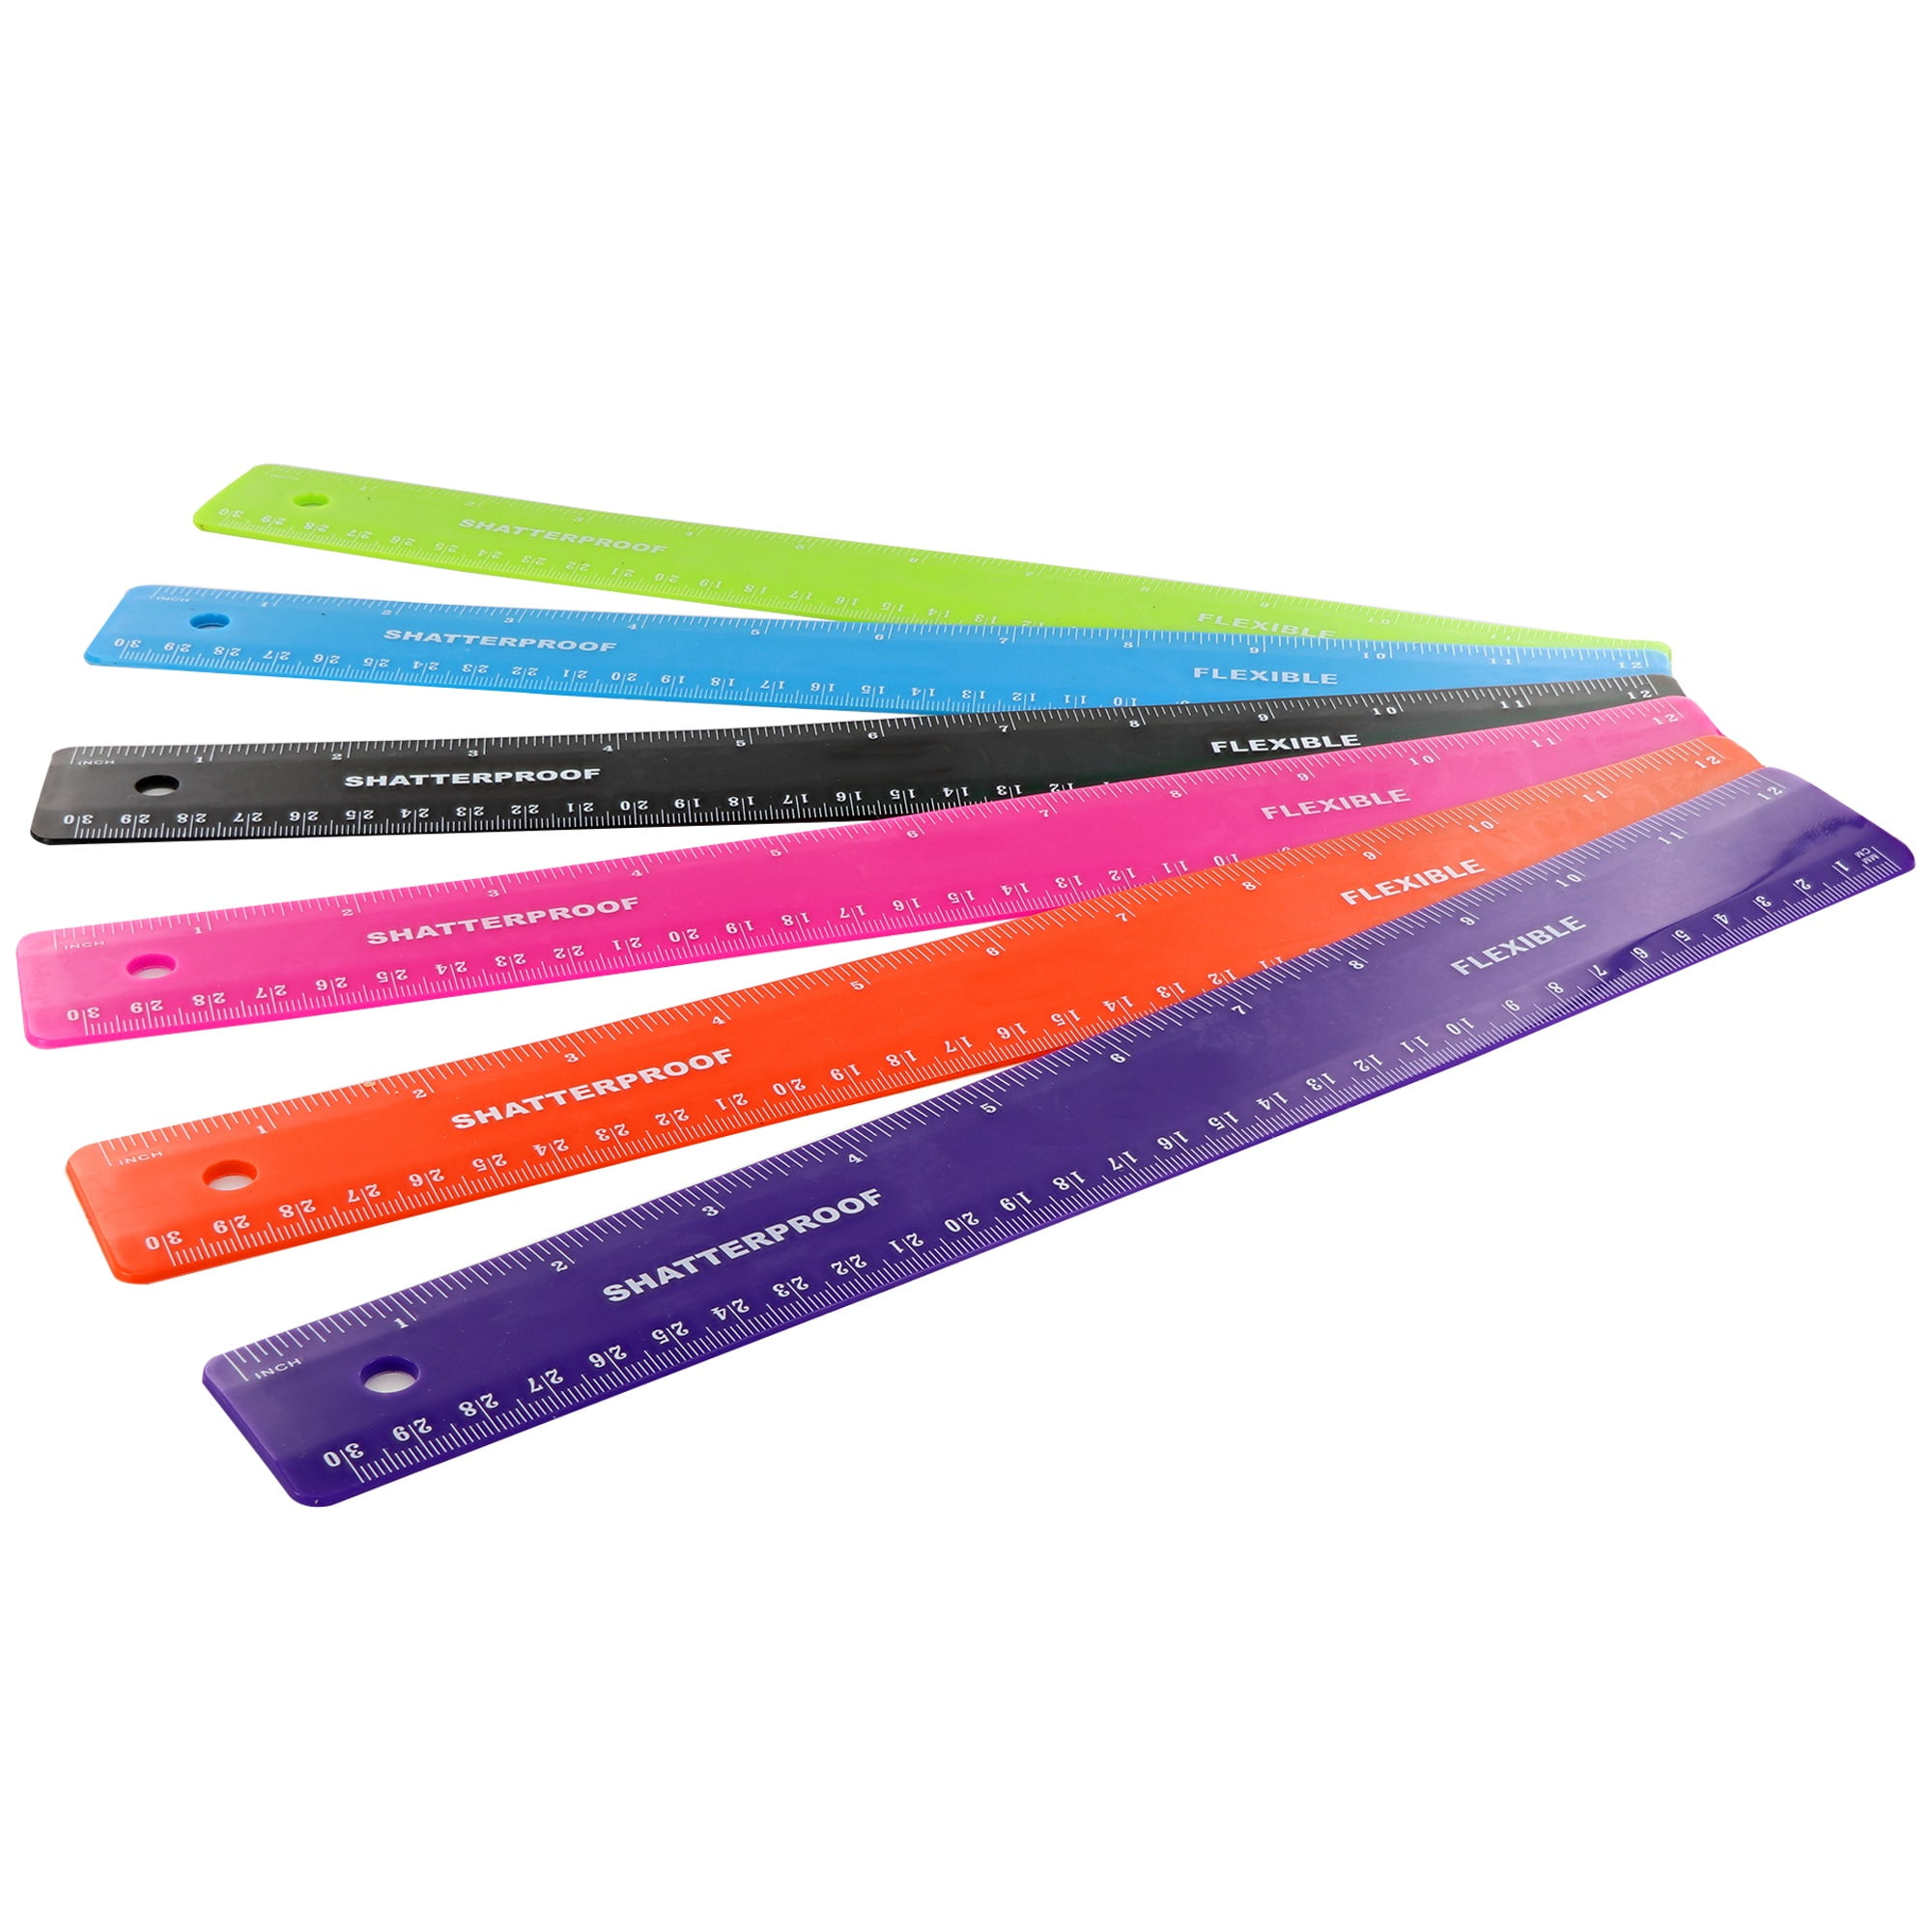 Green Pink Inches & Centimeters Plastic Straight Edge Rulers School Supplies Purple 20 Pc Ruler 12 Inch/ 30 cm Jeweltone – by Enday 5 Packs of 4 Rulers Blue Standard Ruler for Kids Adults 